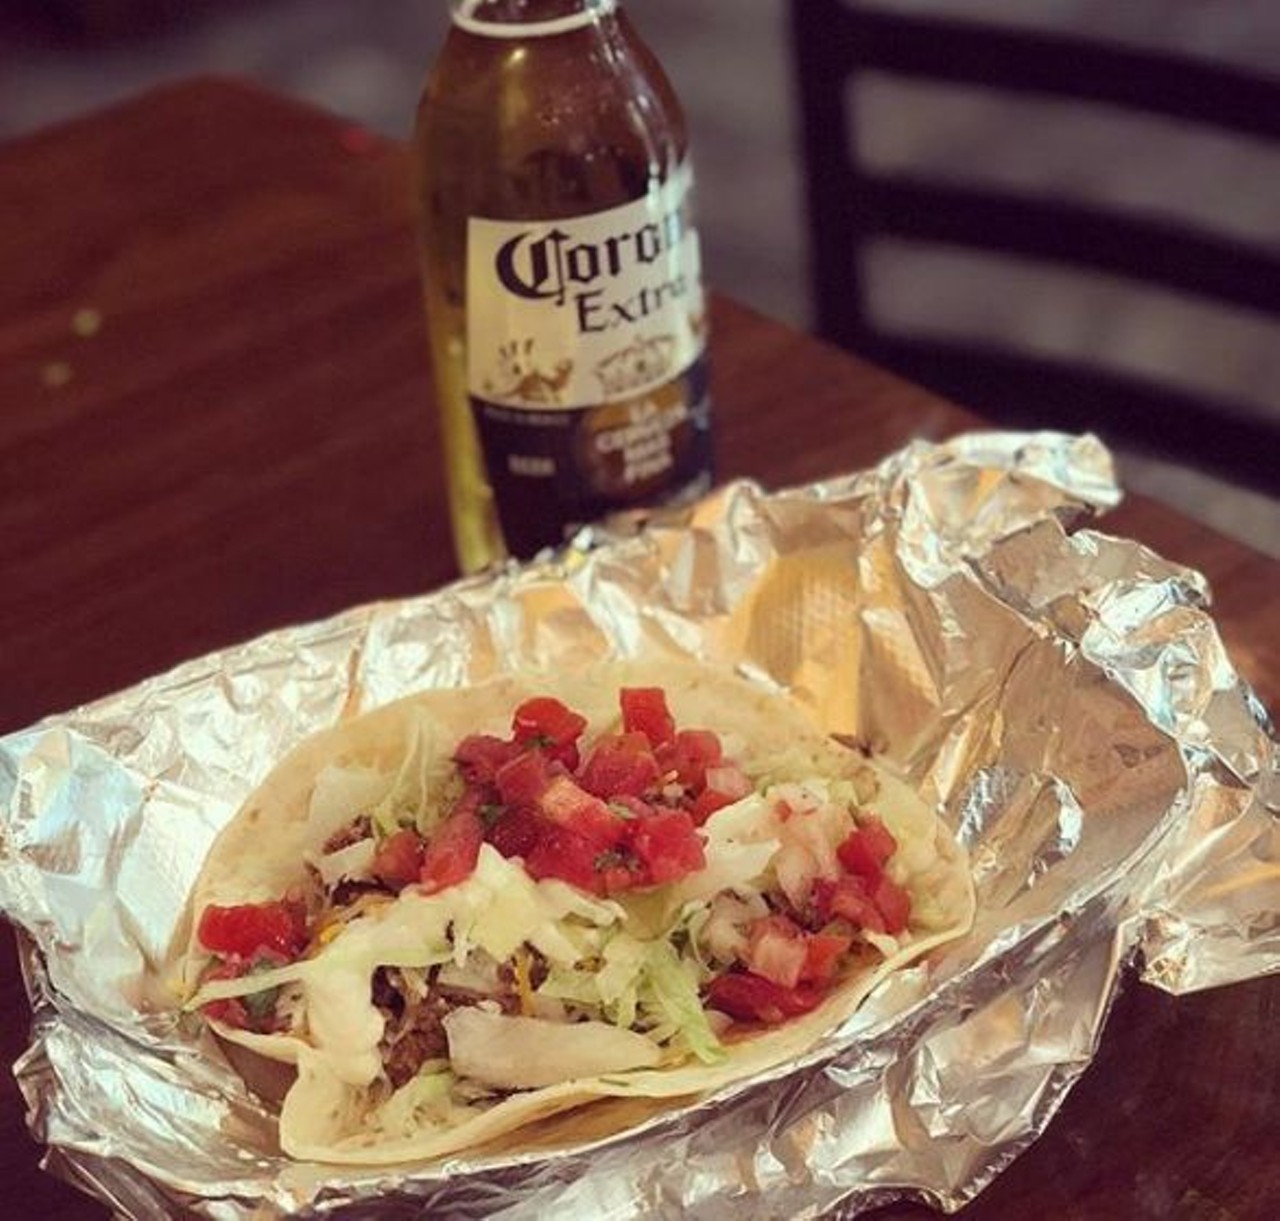 Gringos Locos  
915 E. Michigan St., 407-849-1888
This new location of Orlando&#146;s favorite drunk-food providers serves up everything from Double-Ds tacos to the Mouth-Hugger burrito.
Photo via otowngrub / Instagram